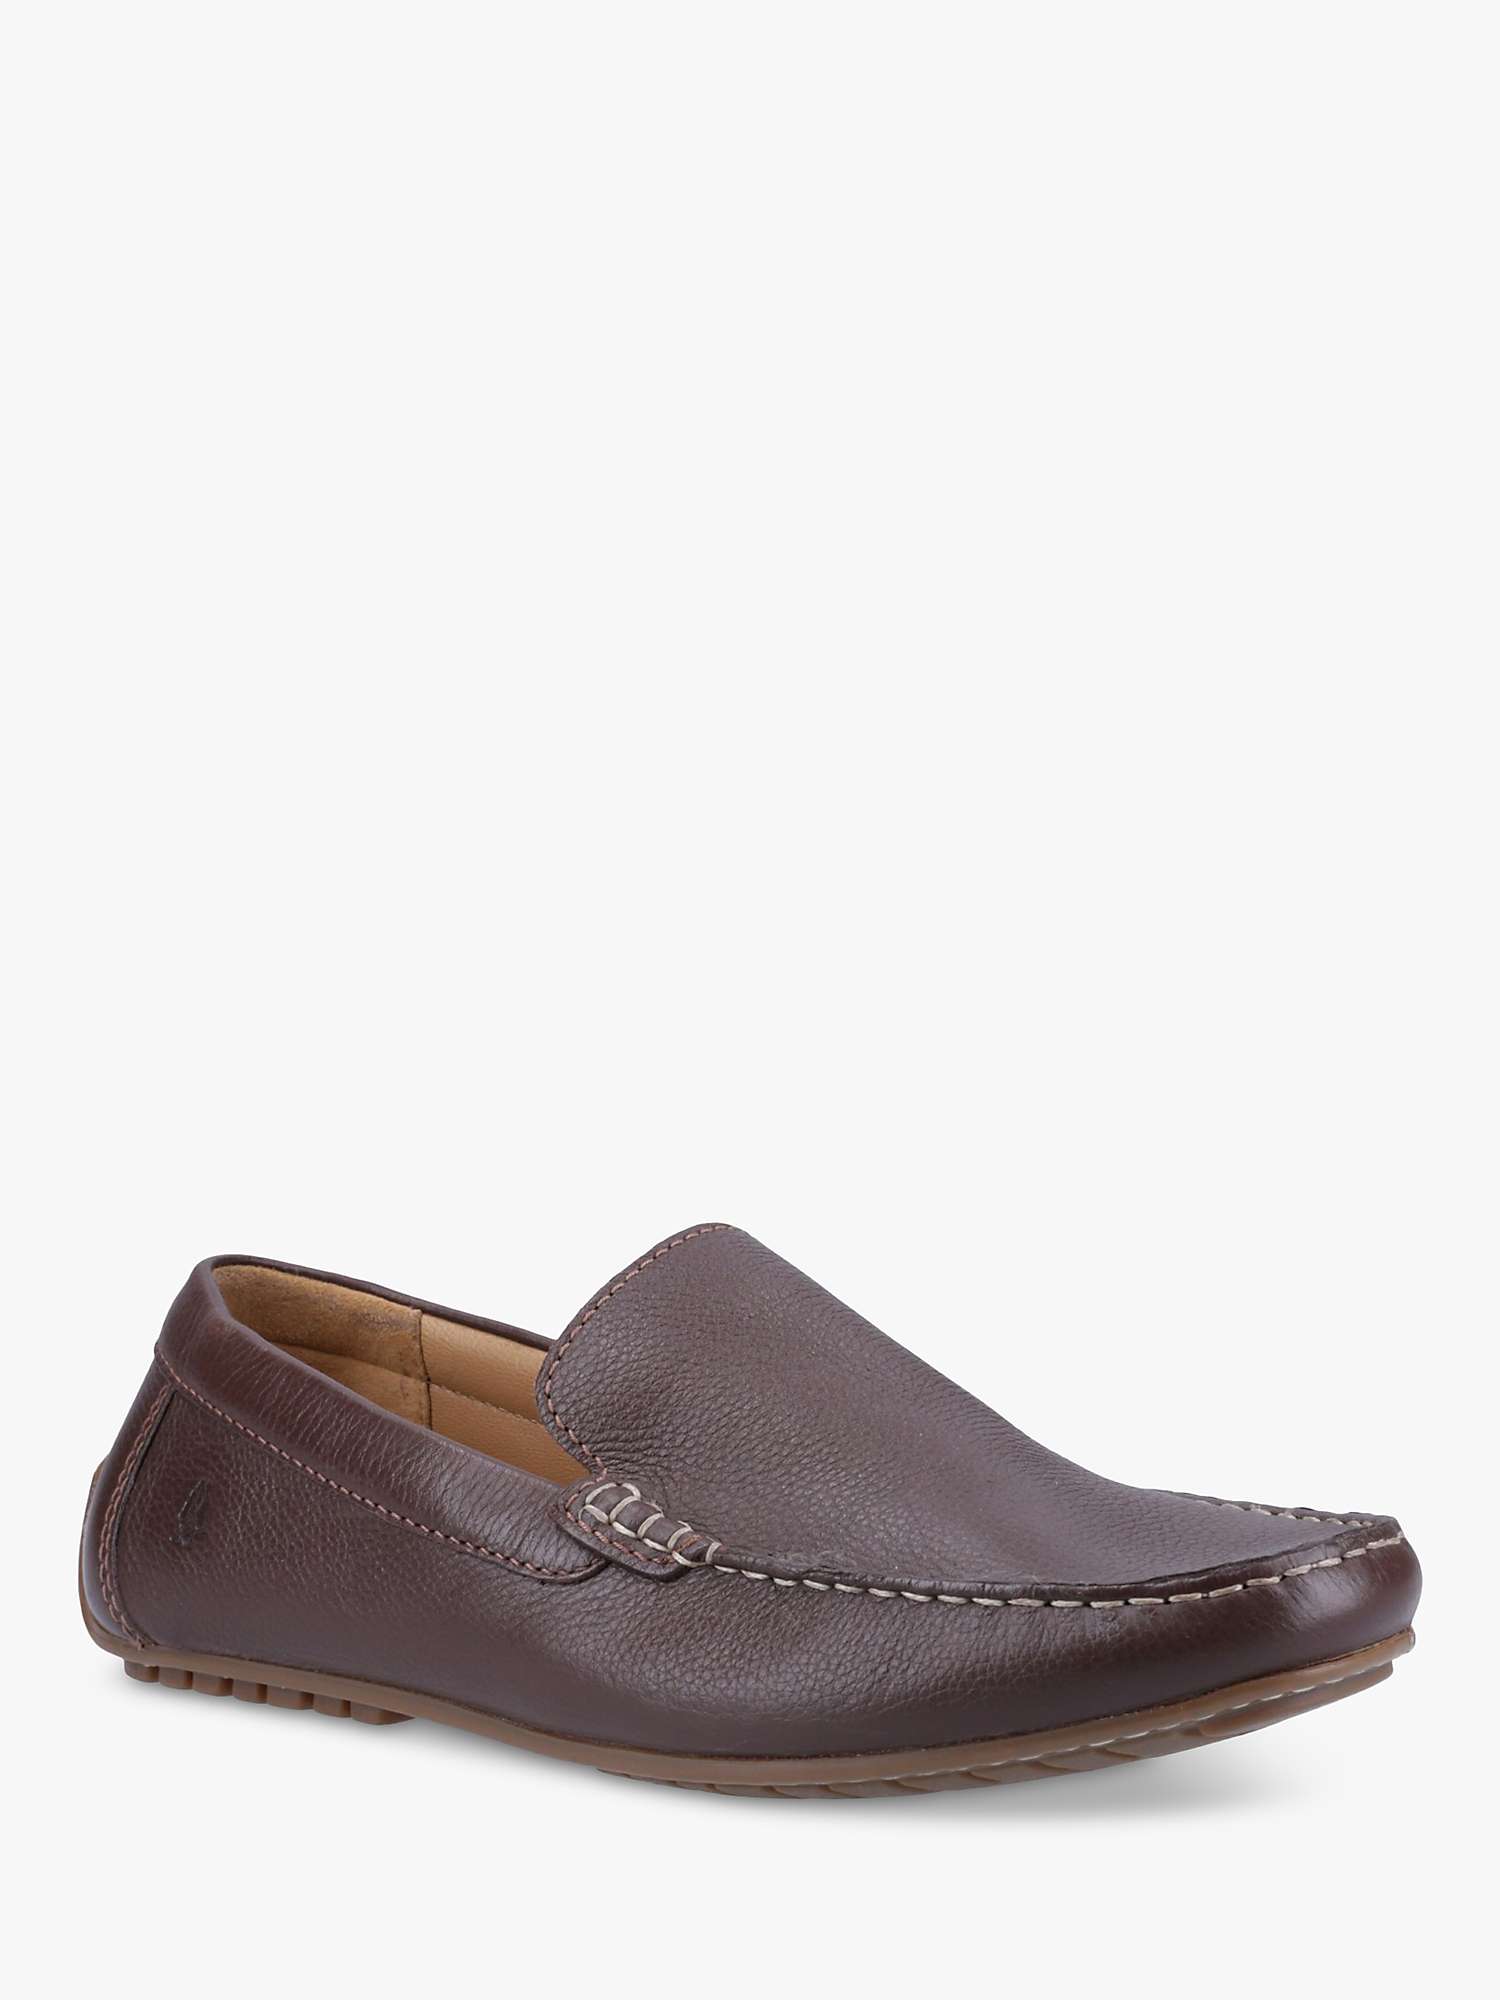 Buy Hush Puppies Ralph Leather Slip On Loafers Online at johnlewis.com